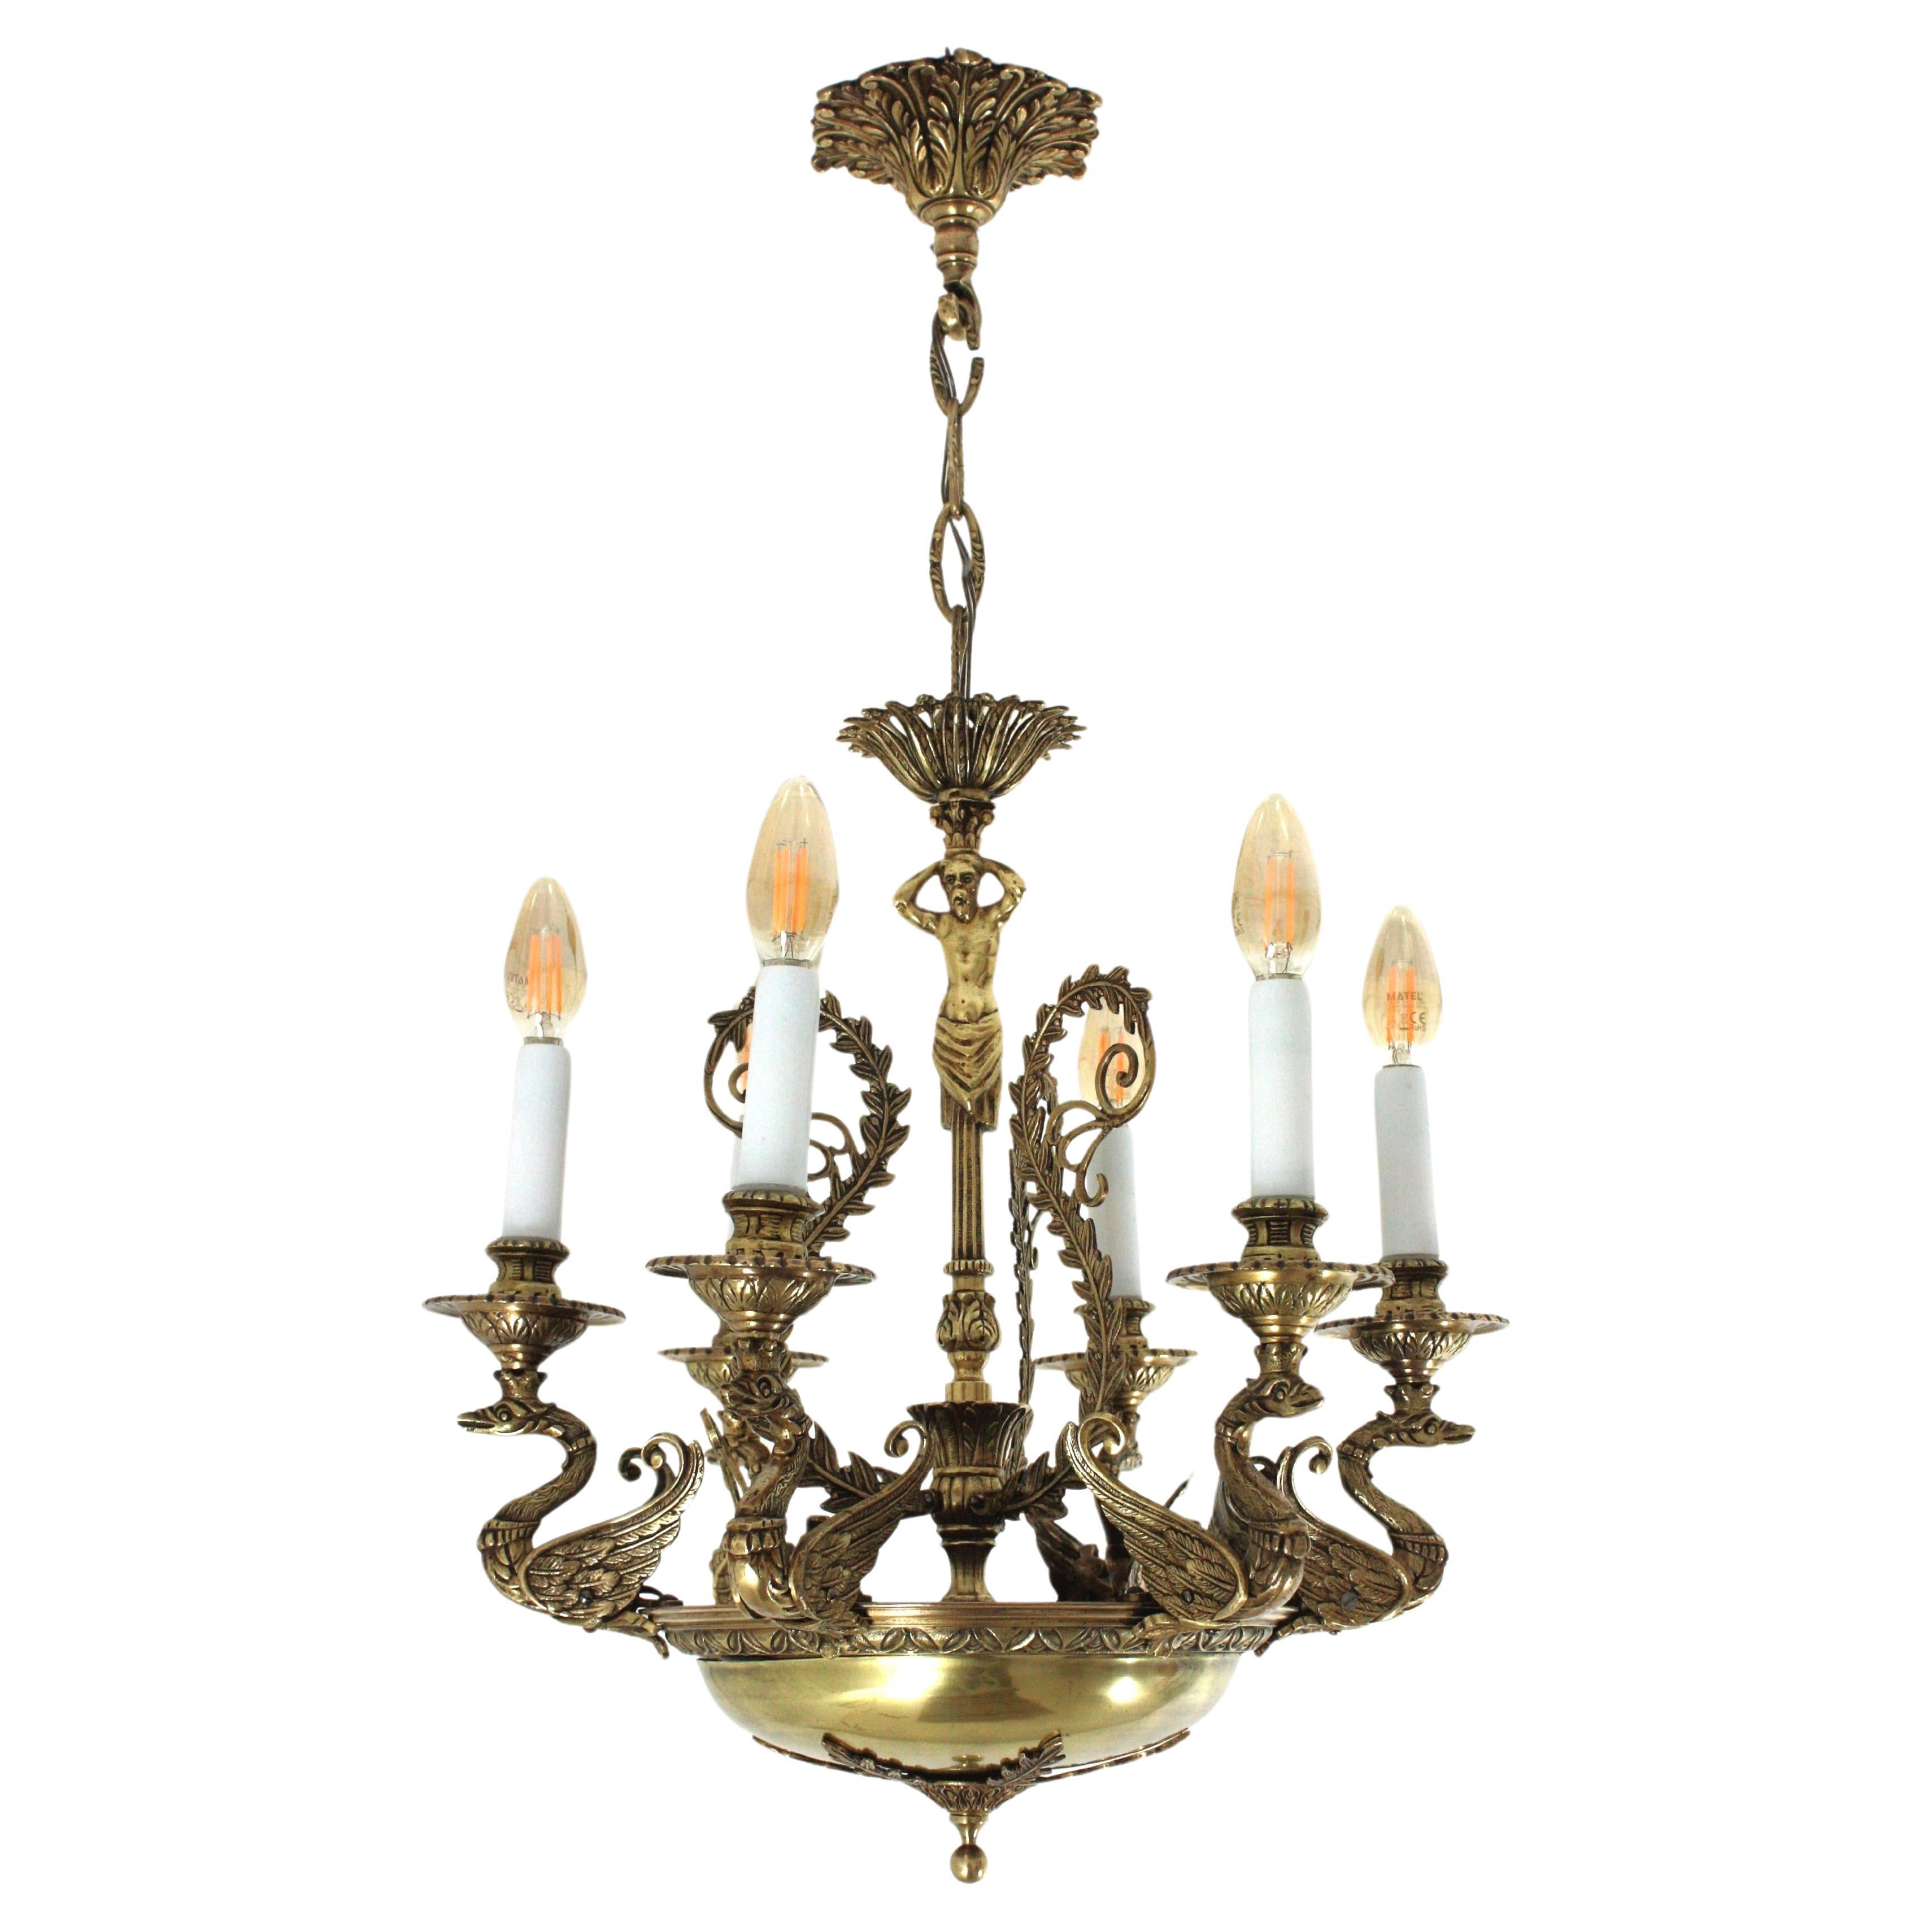 Very Fine Empire Style Neoclassical Six-Arm Bronze Swan Chandelier, France, 1930s
Gorgeous six lights bronze chandelier with foliage and figural motifs.
Rare French Empire style bronze tole chandelier with six arms featuring flying swans details,